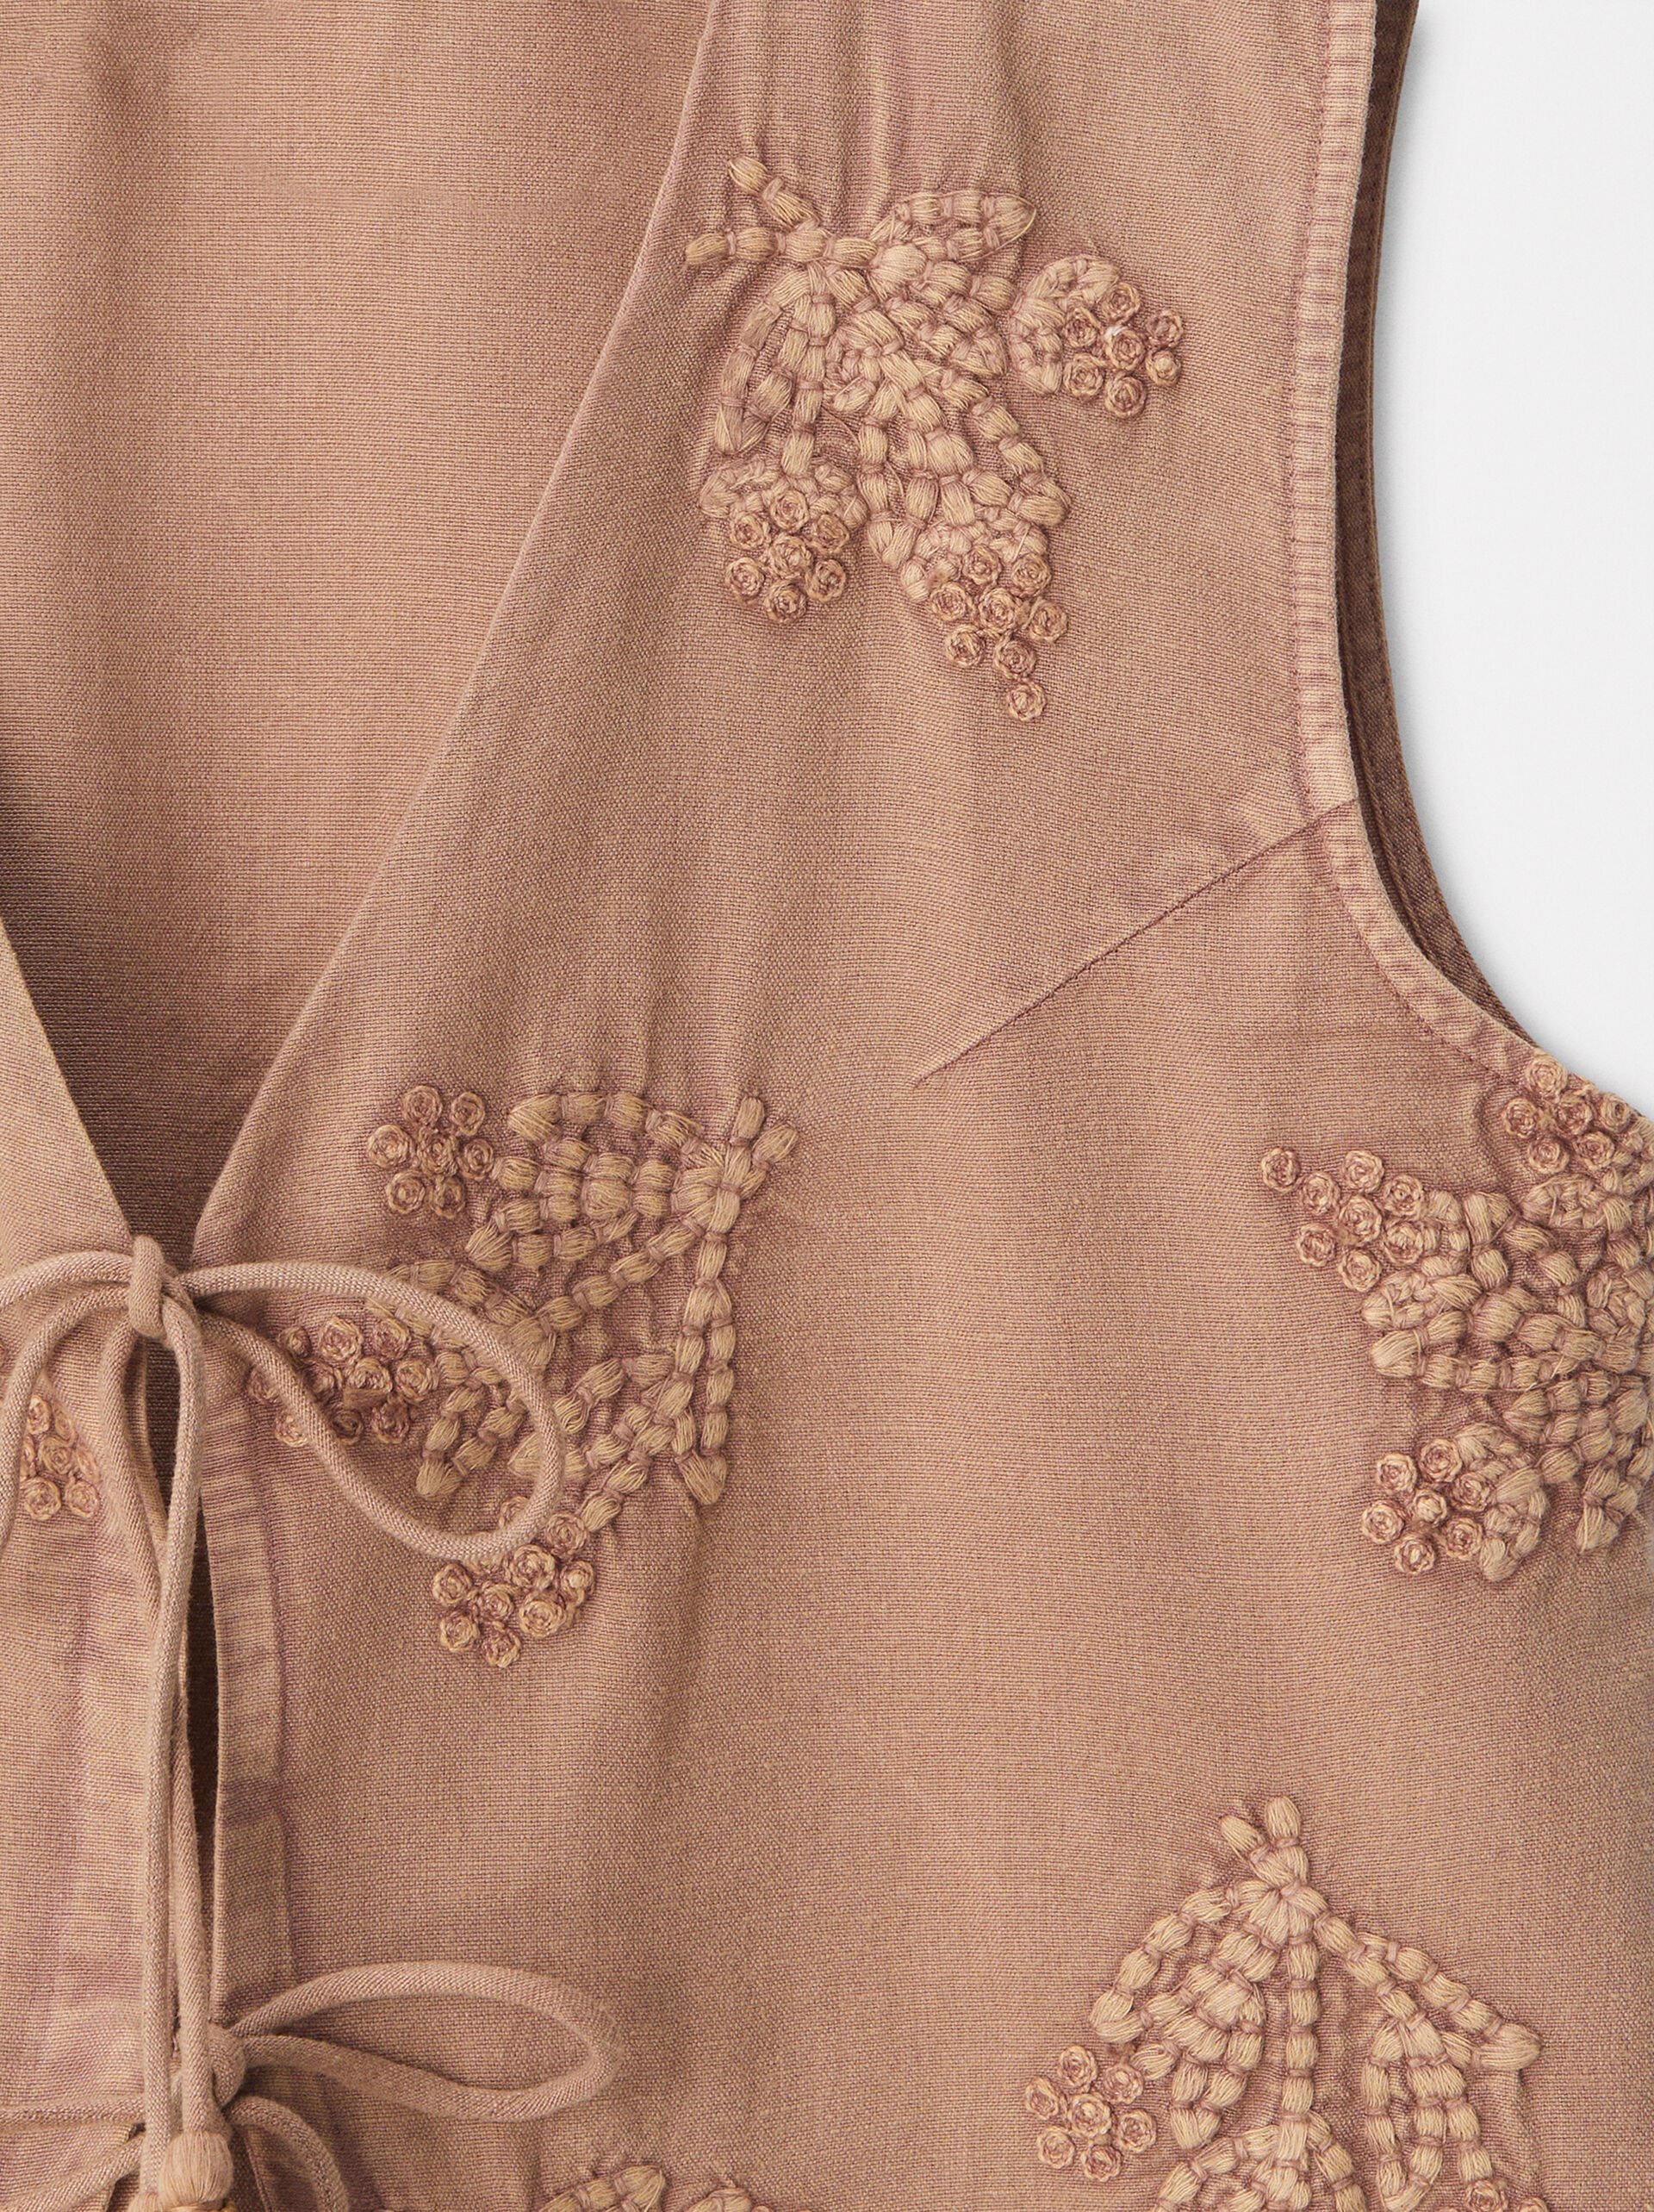 Embroidered Vest With Bows